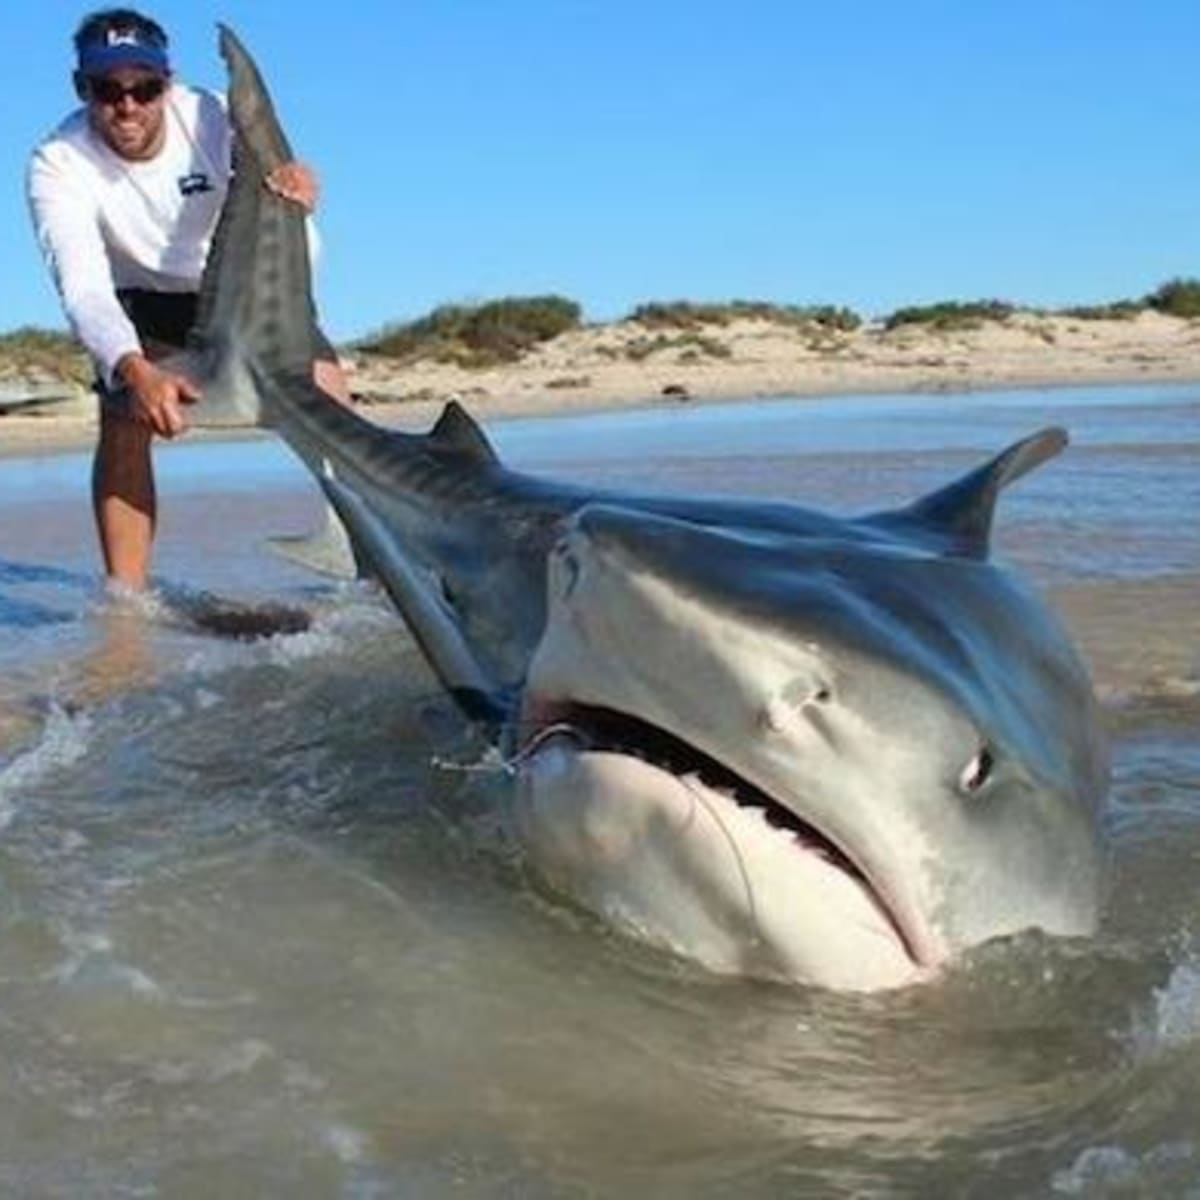 Giant tiger sharks caught by surf fishermen so calm 'they'll sit